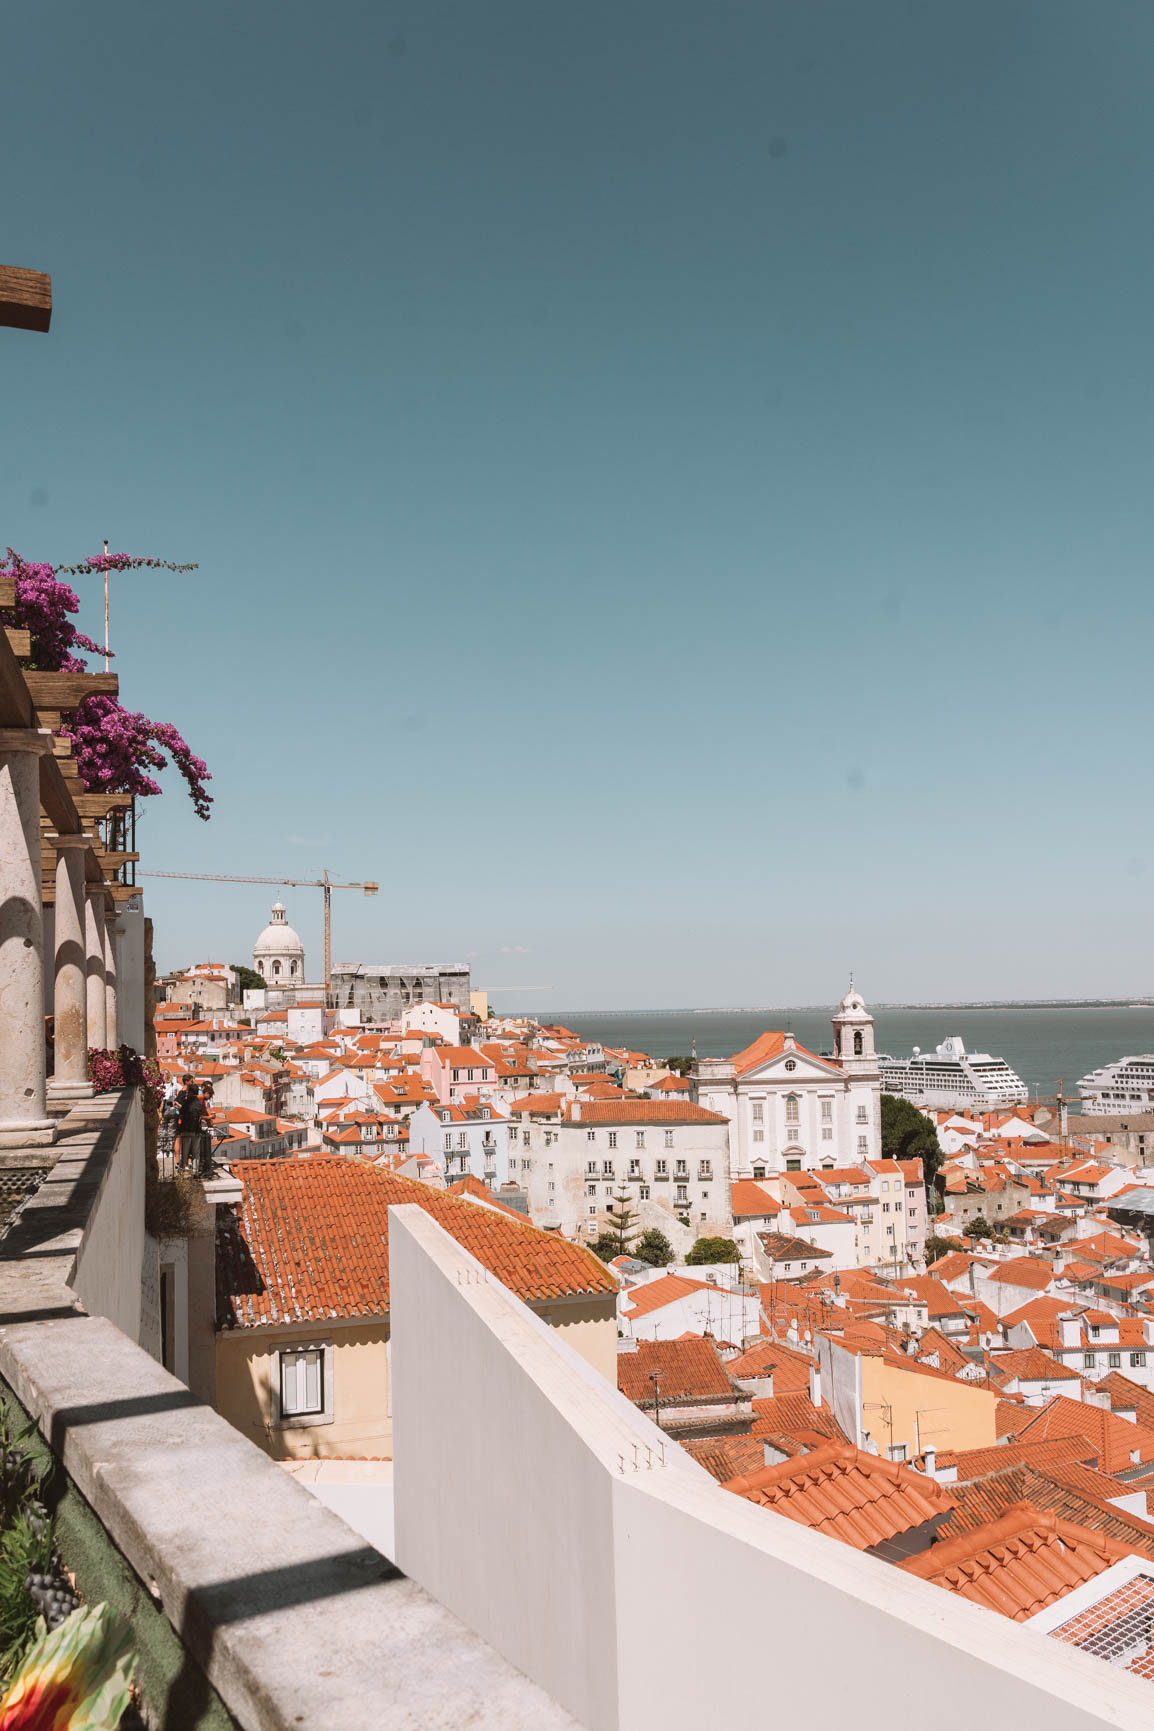 Fun Things to do in Lisbon Portugal - Explore Bairro Alto and Alfama #Lisbon #Portugal #Europe 2 - 3 Days Itinerary in Lisbon | Lisbon Viewpoint